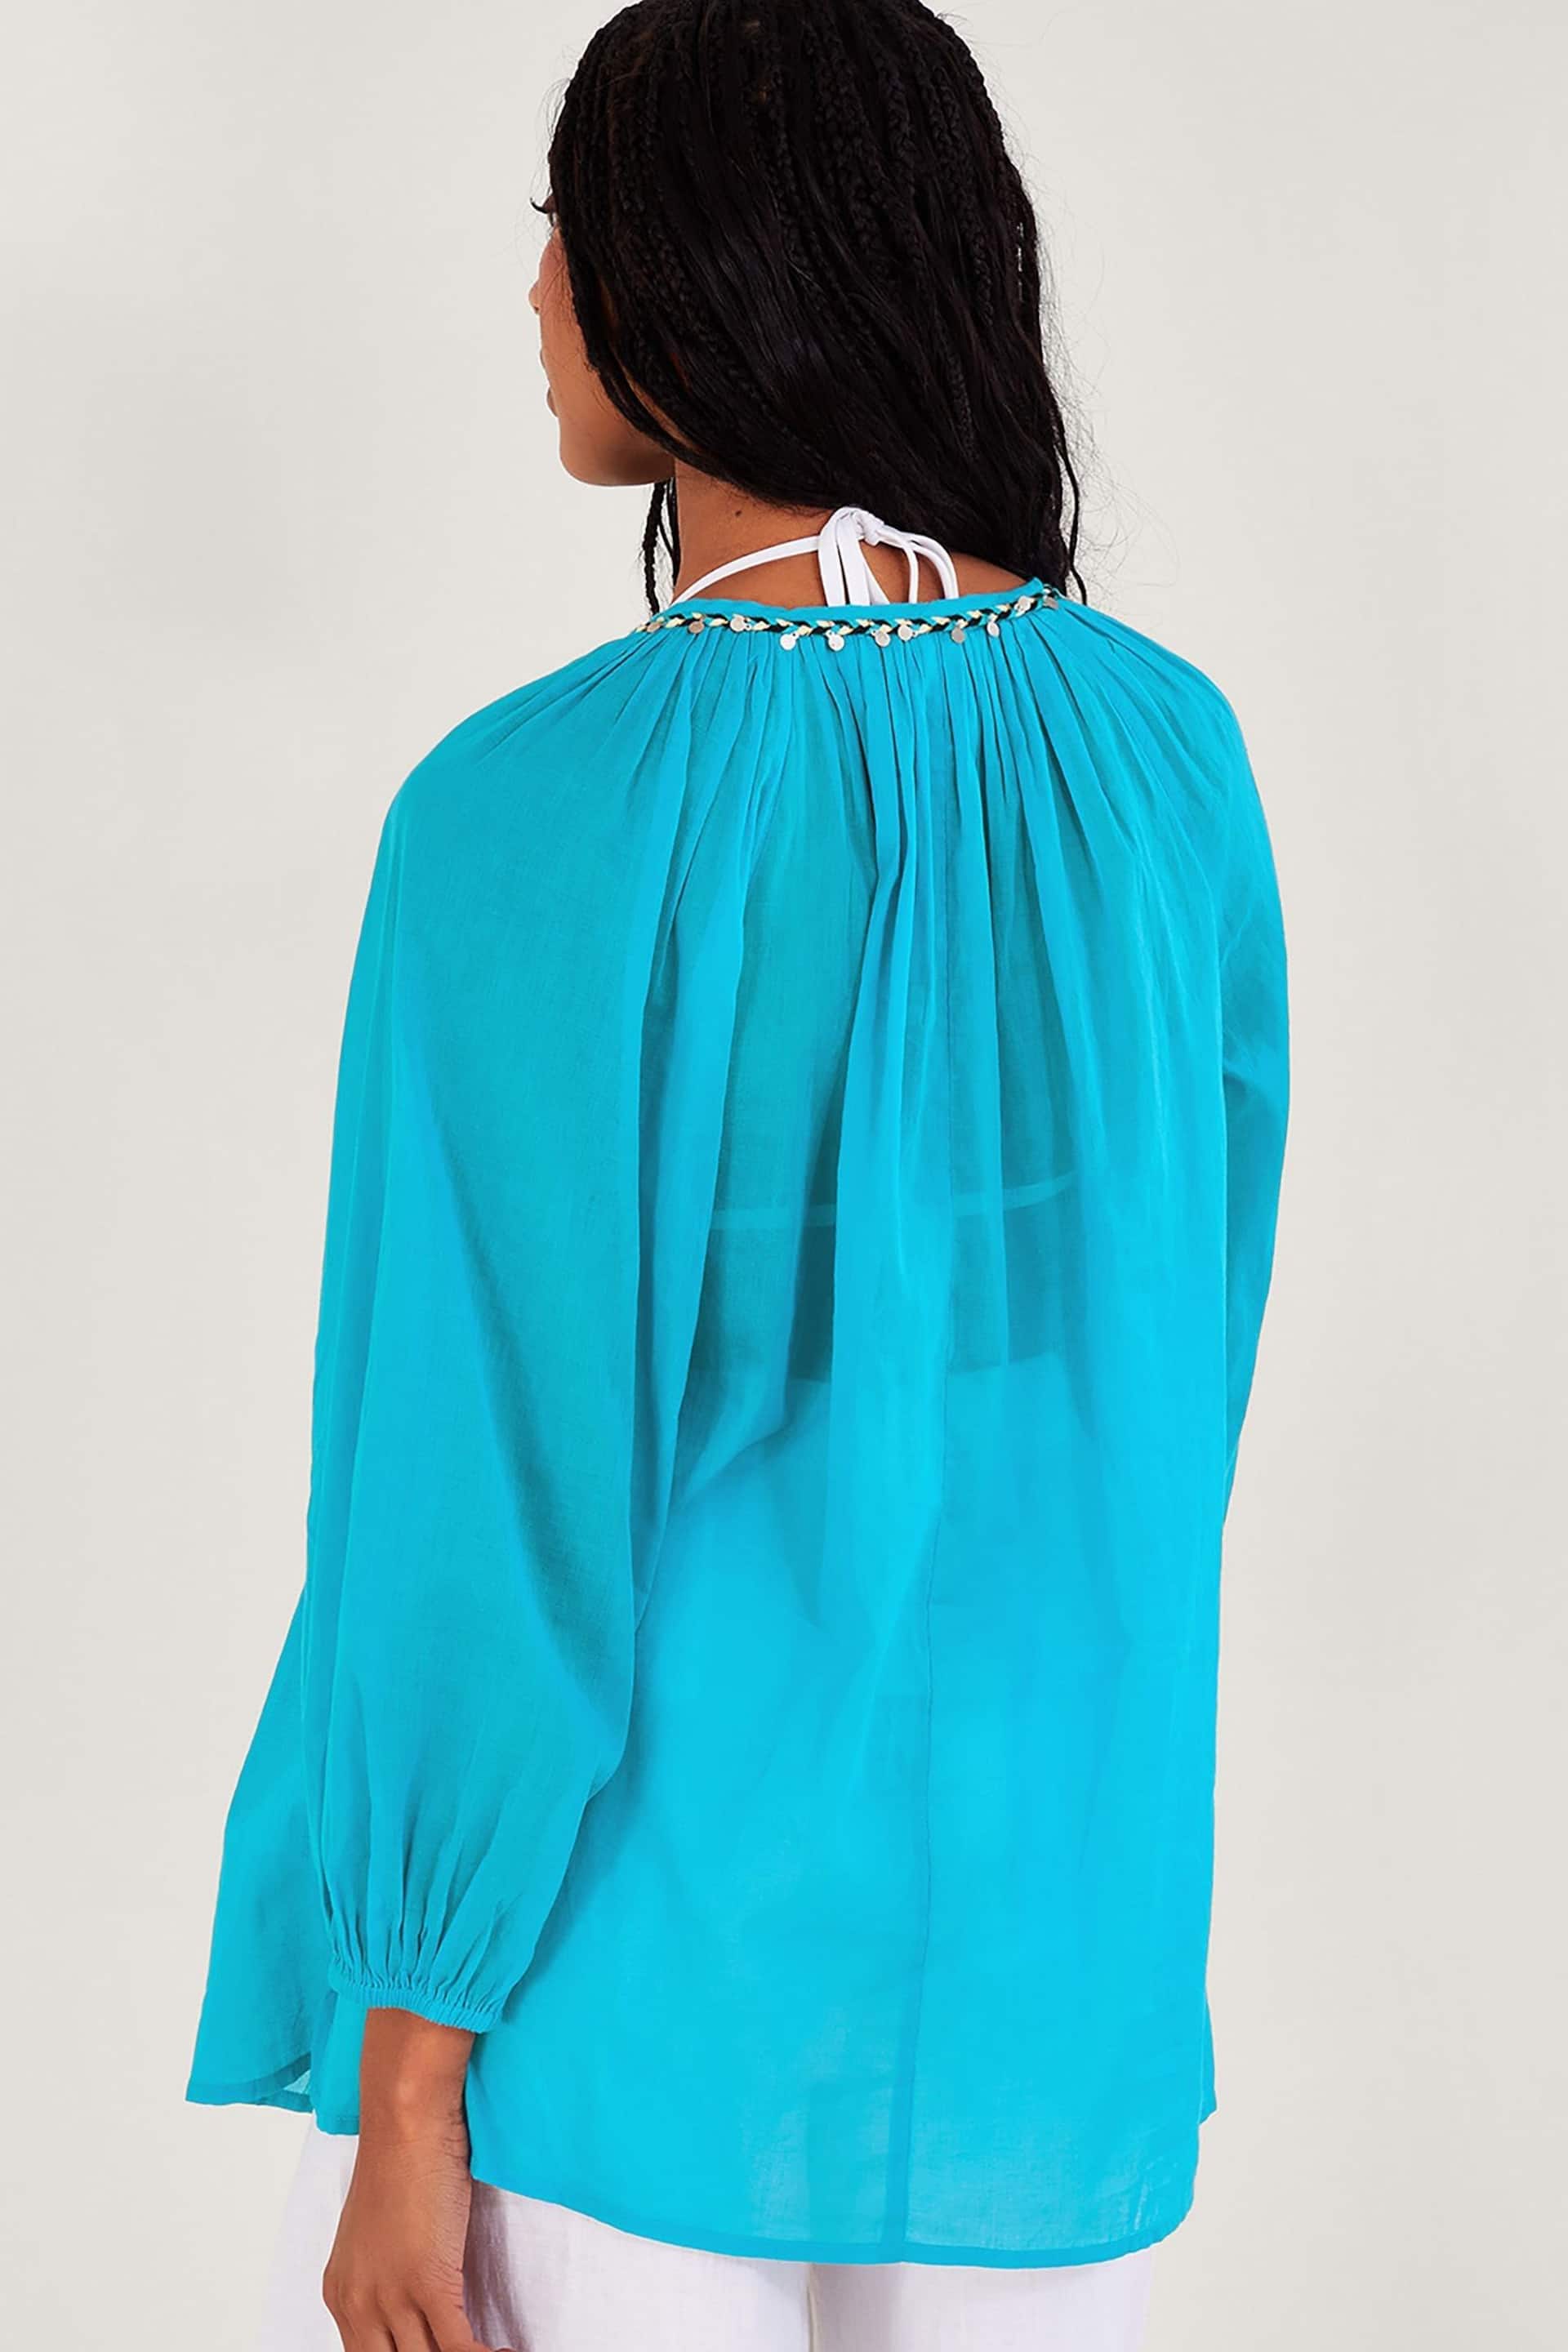 Monsoon Blue Amy Tie Neck Top - Image 2 of 4